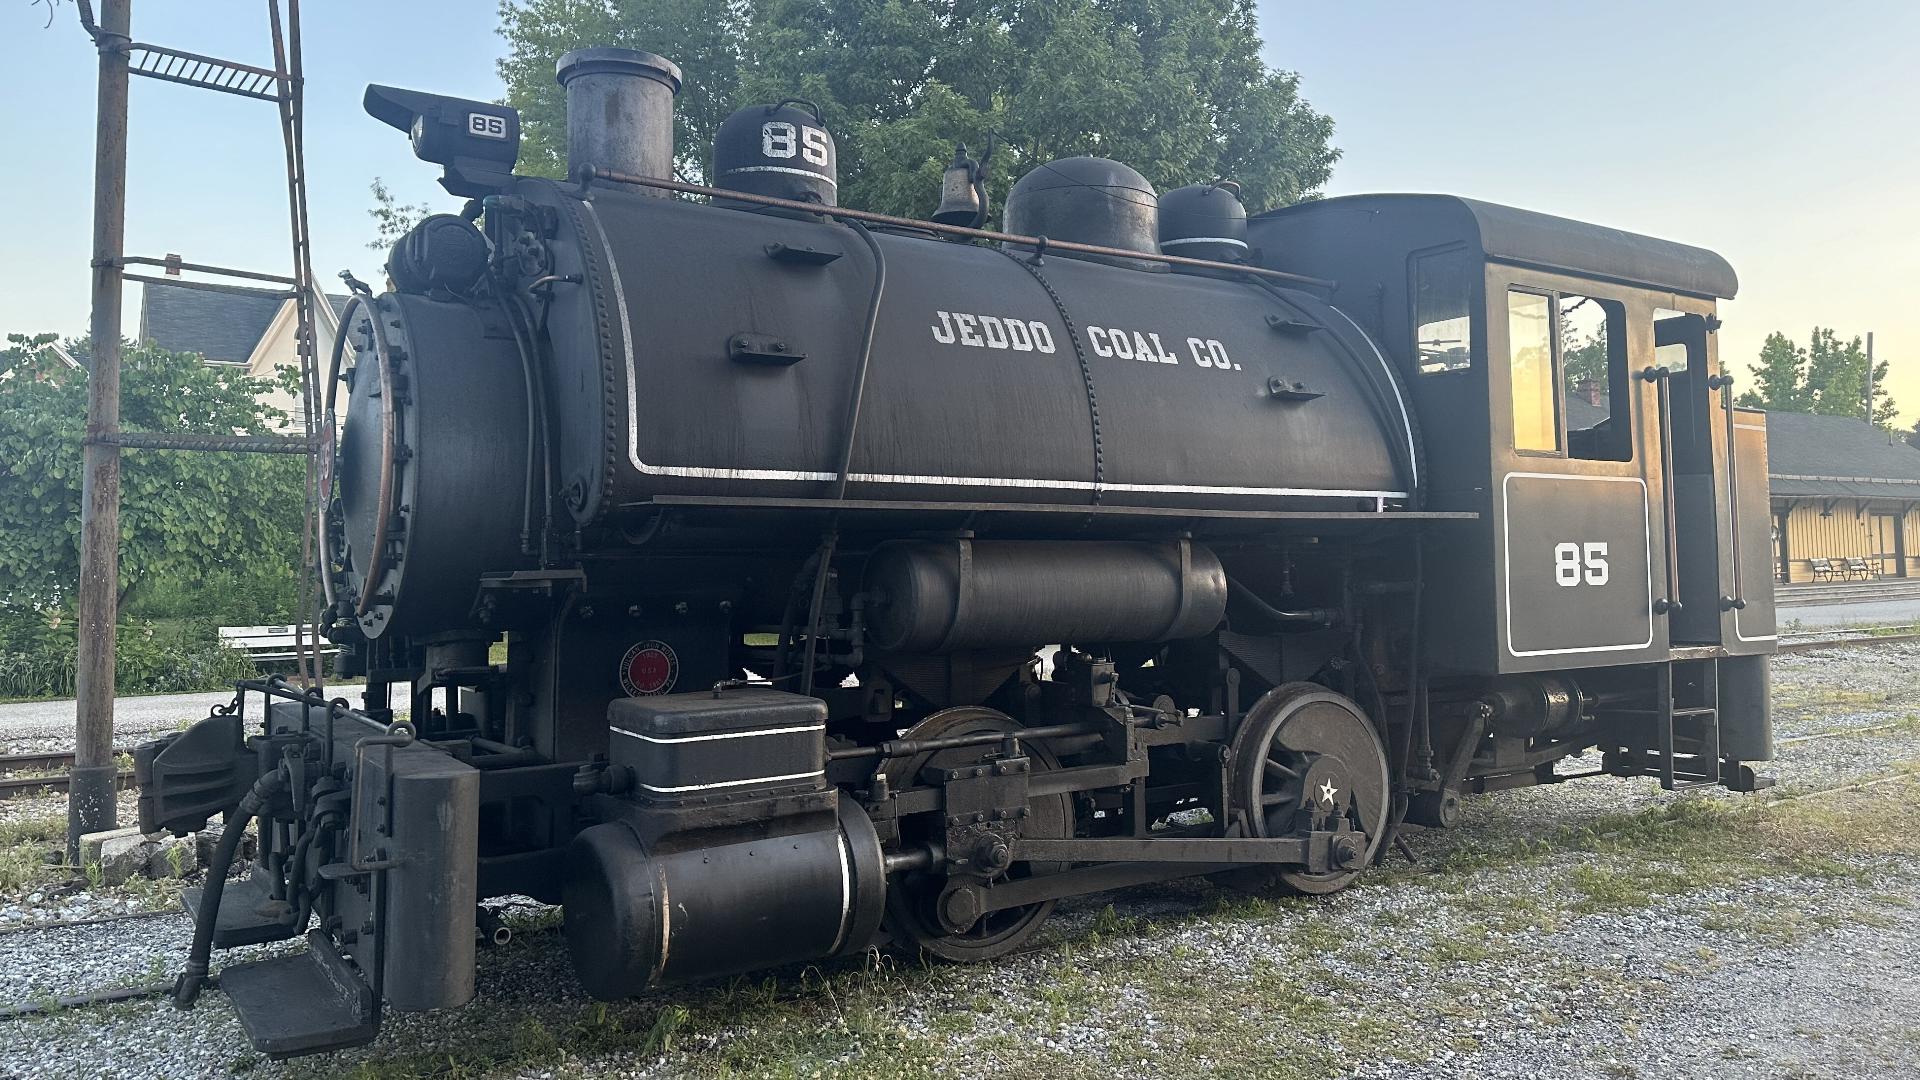 Riders can get on a rare 1928 steam locomotive on the Northern Central Railway of York from New Freedom to Glen Rock.